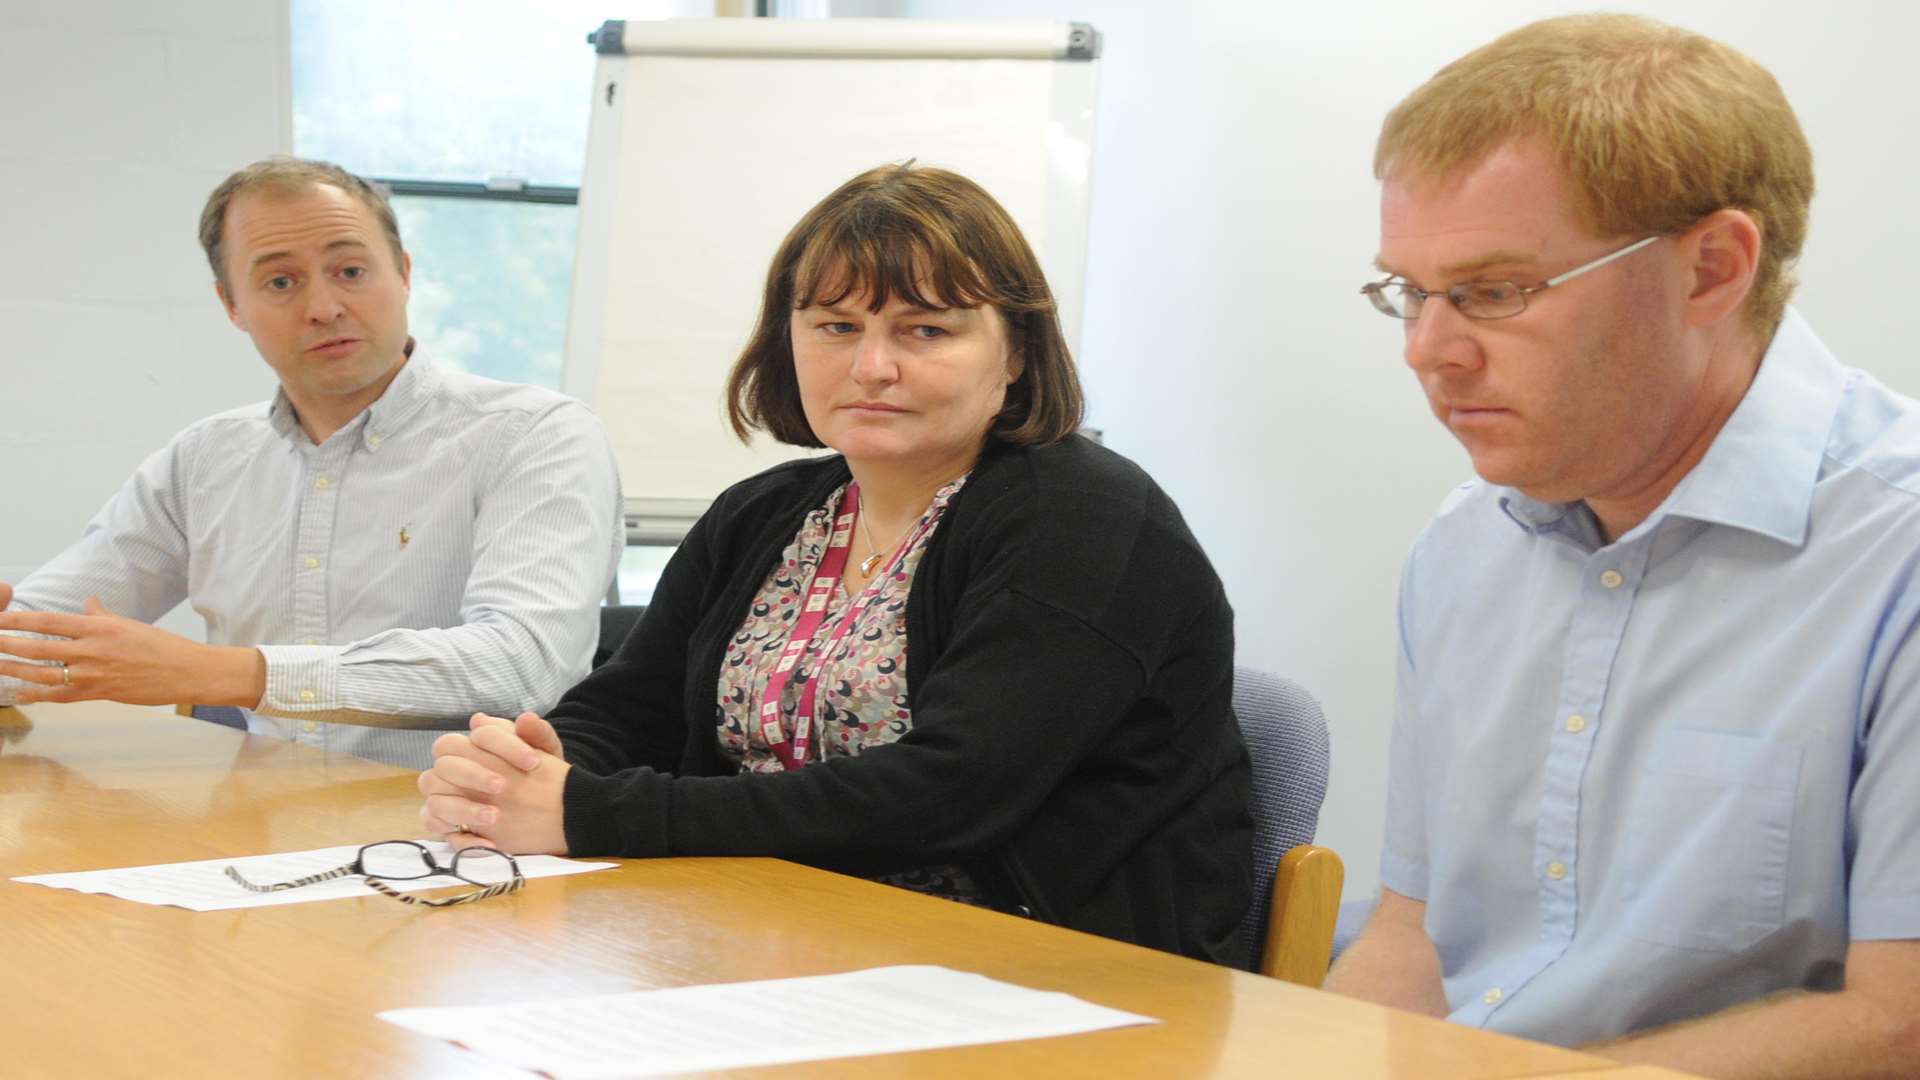 Simon Cook, Larissa Reed, and Rob Davies at the council offices